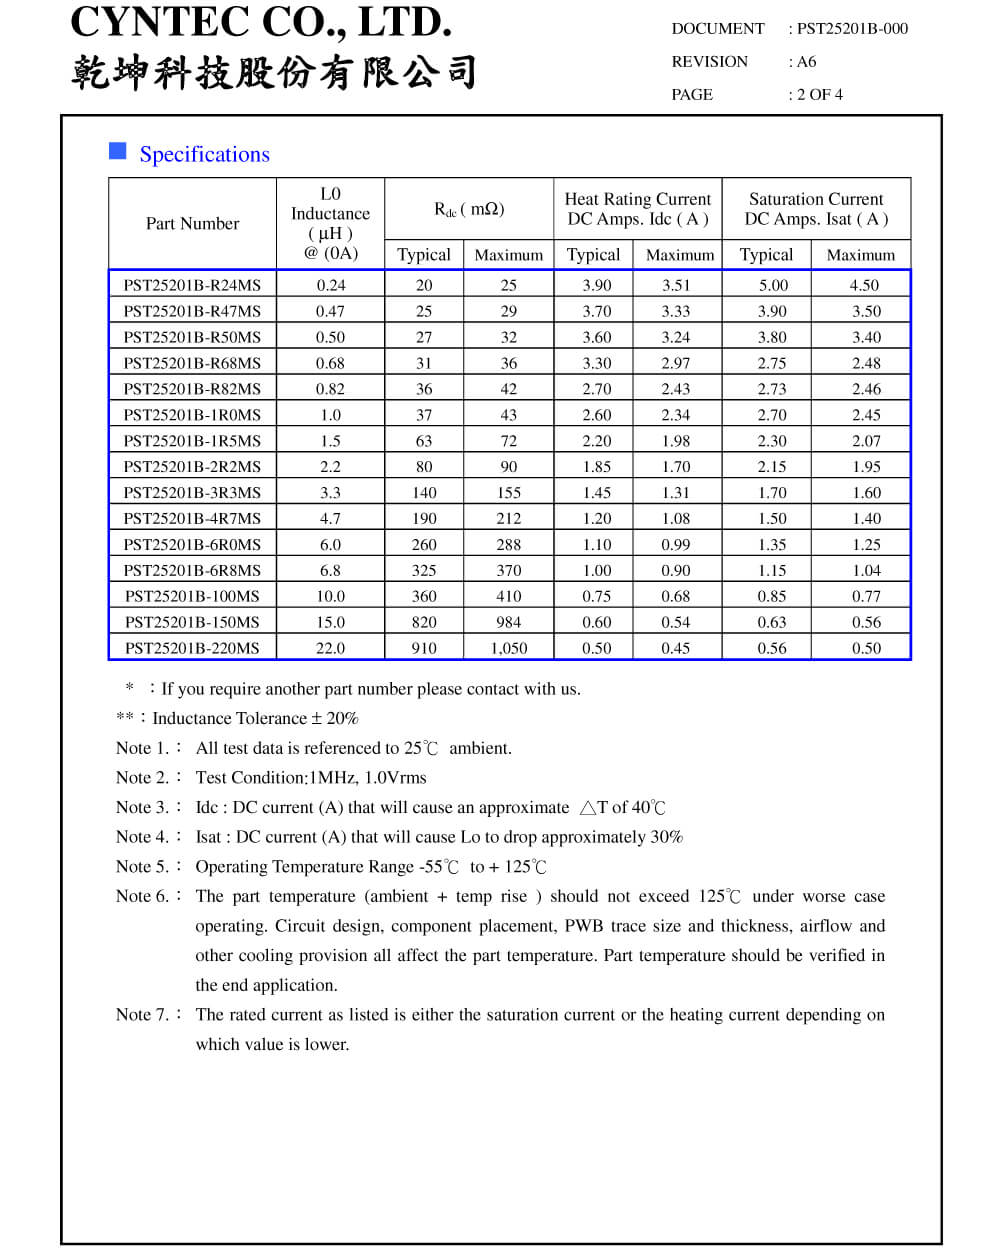 Specifications Of PST25201B-1R0MS